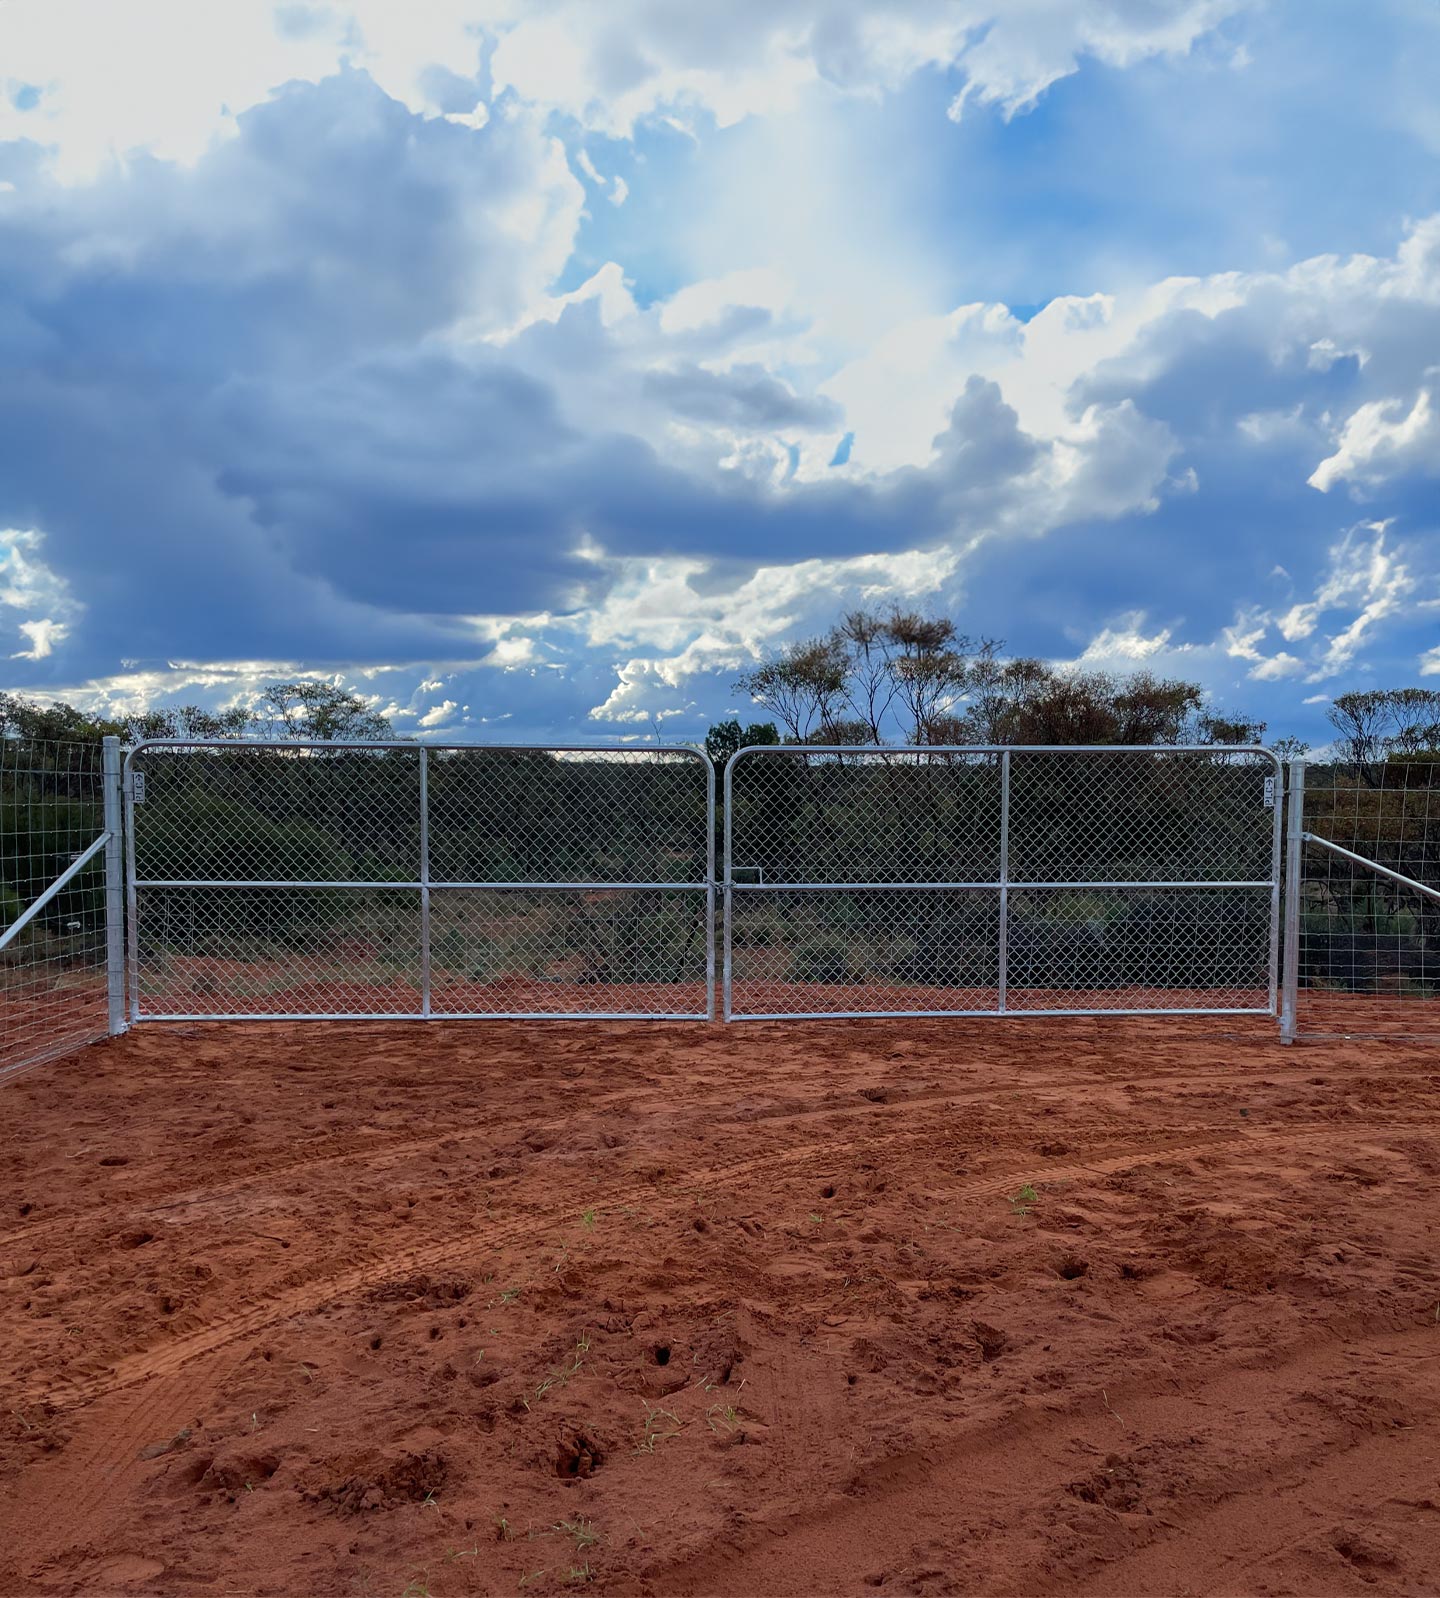 High quality gates and exclusion fencing installed by PLC Fencing in Cooltong, SA.